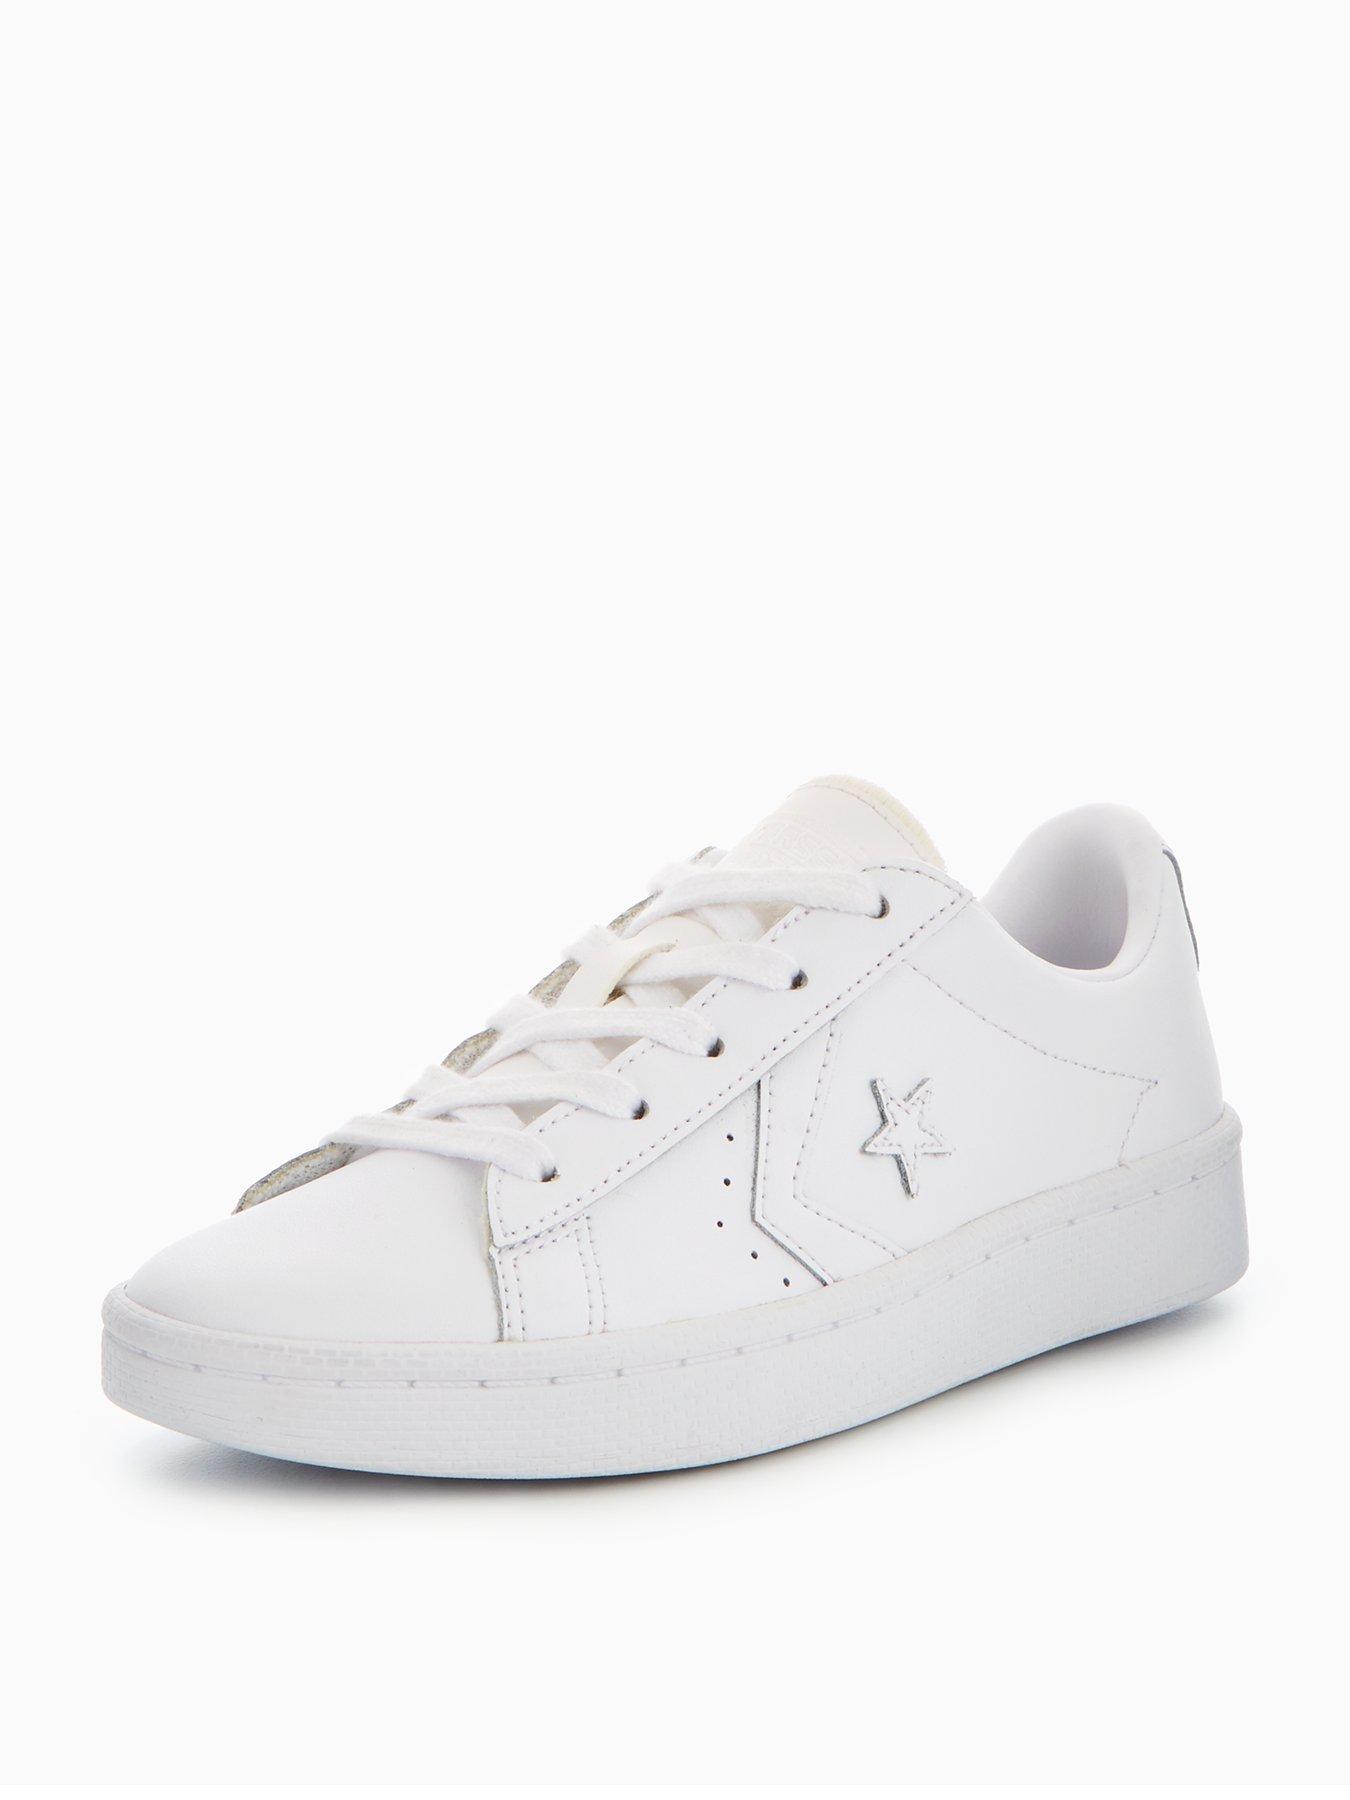 converse star player trainers in white